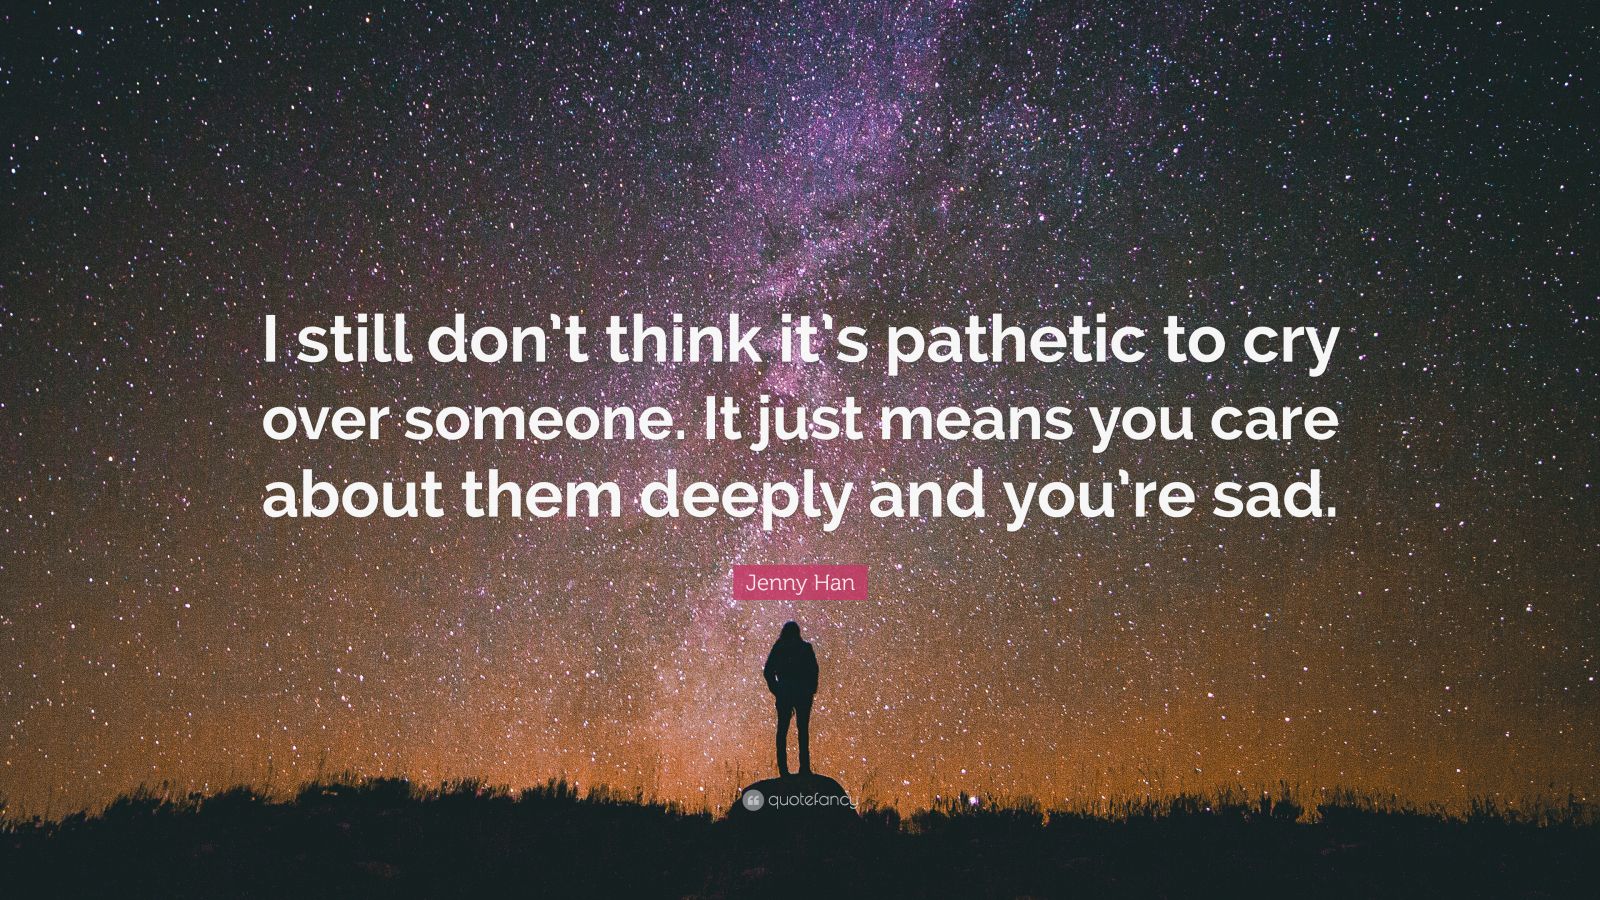 Jenny Han Quote: “I still don’t think it’s pathetic to cry over someone ...